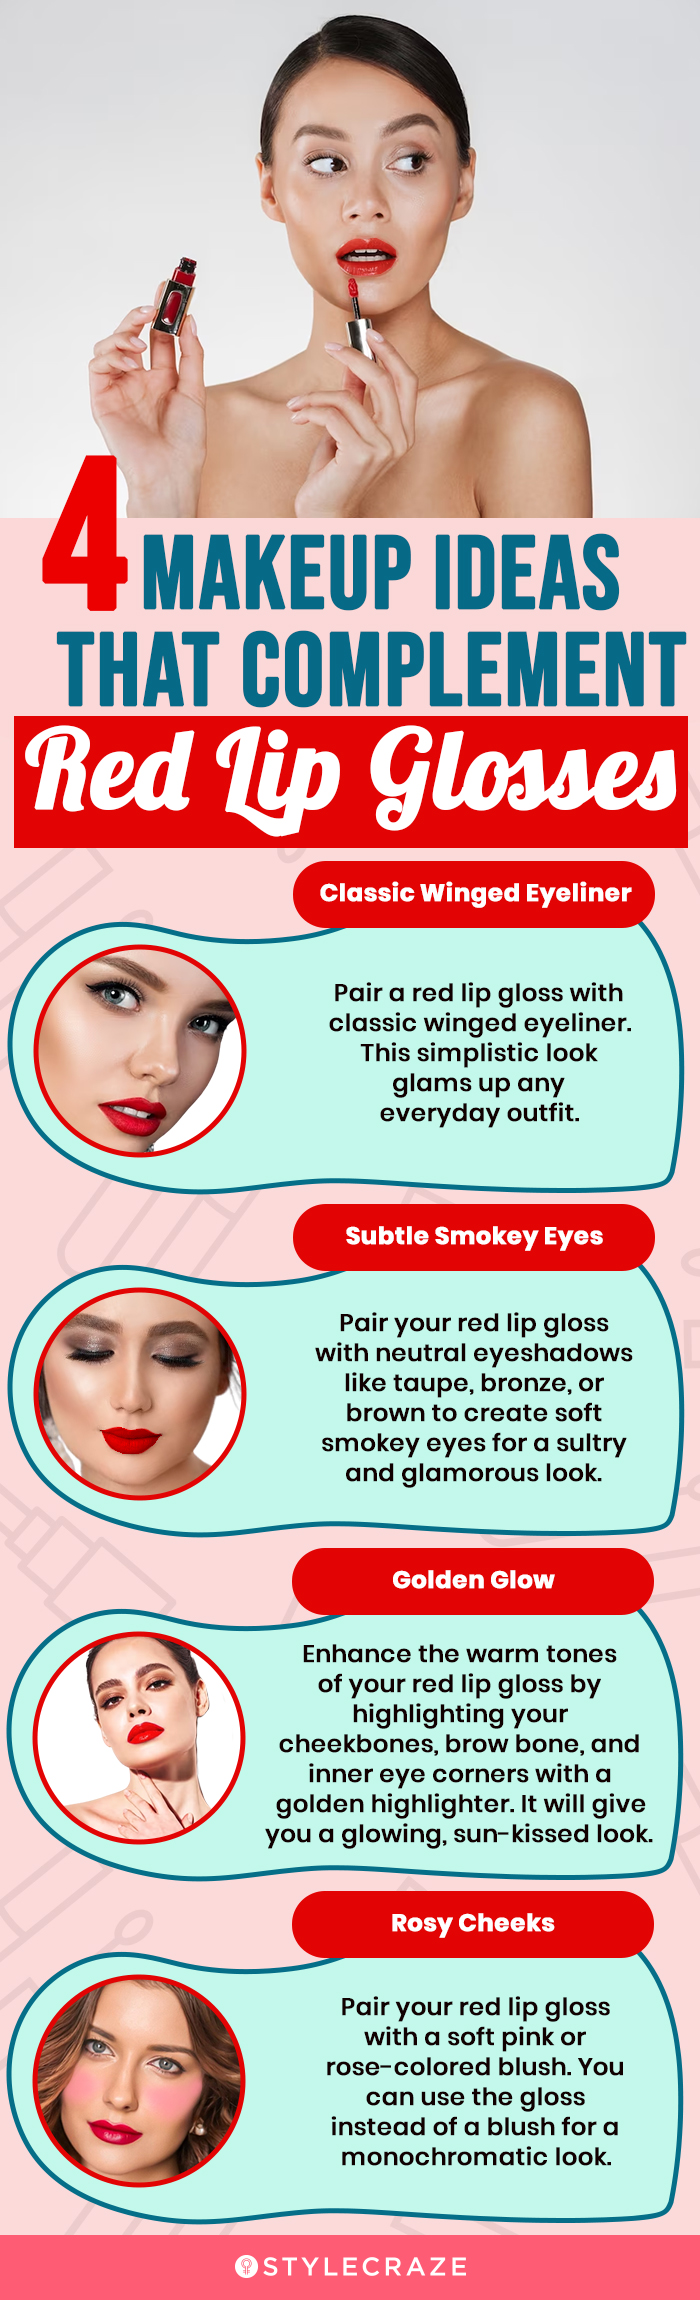 4 Makeup Ideas That Complement Red Lip Glosses (infographic)